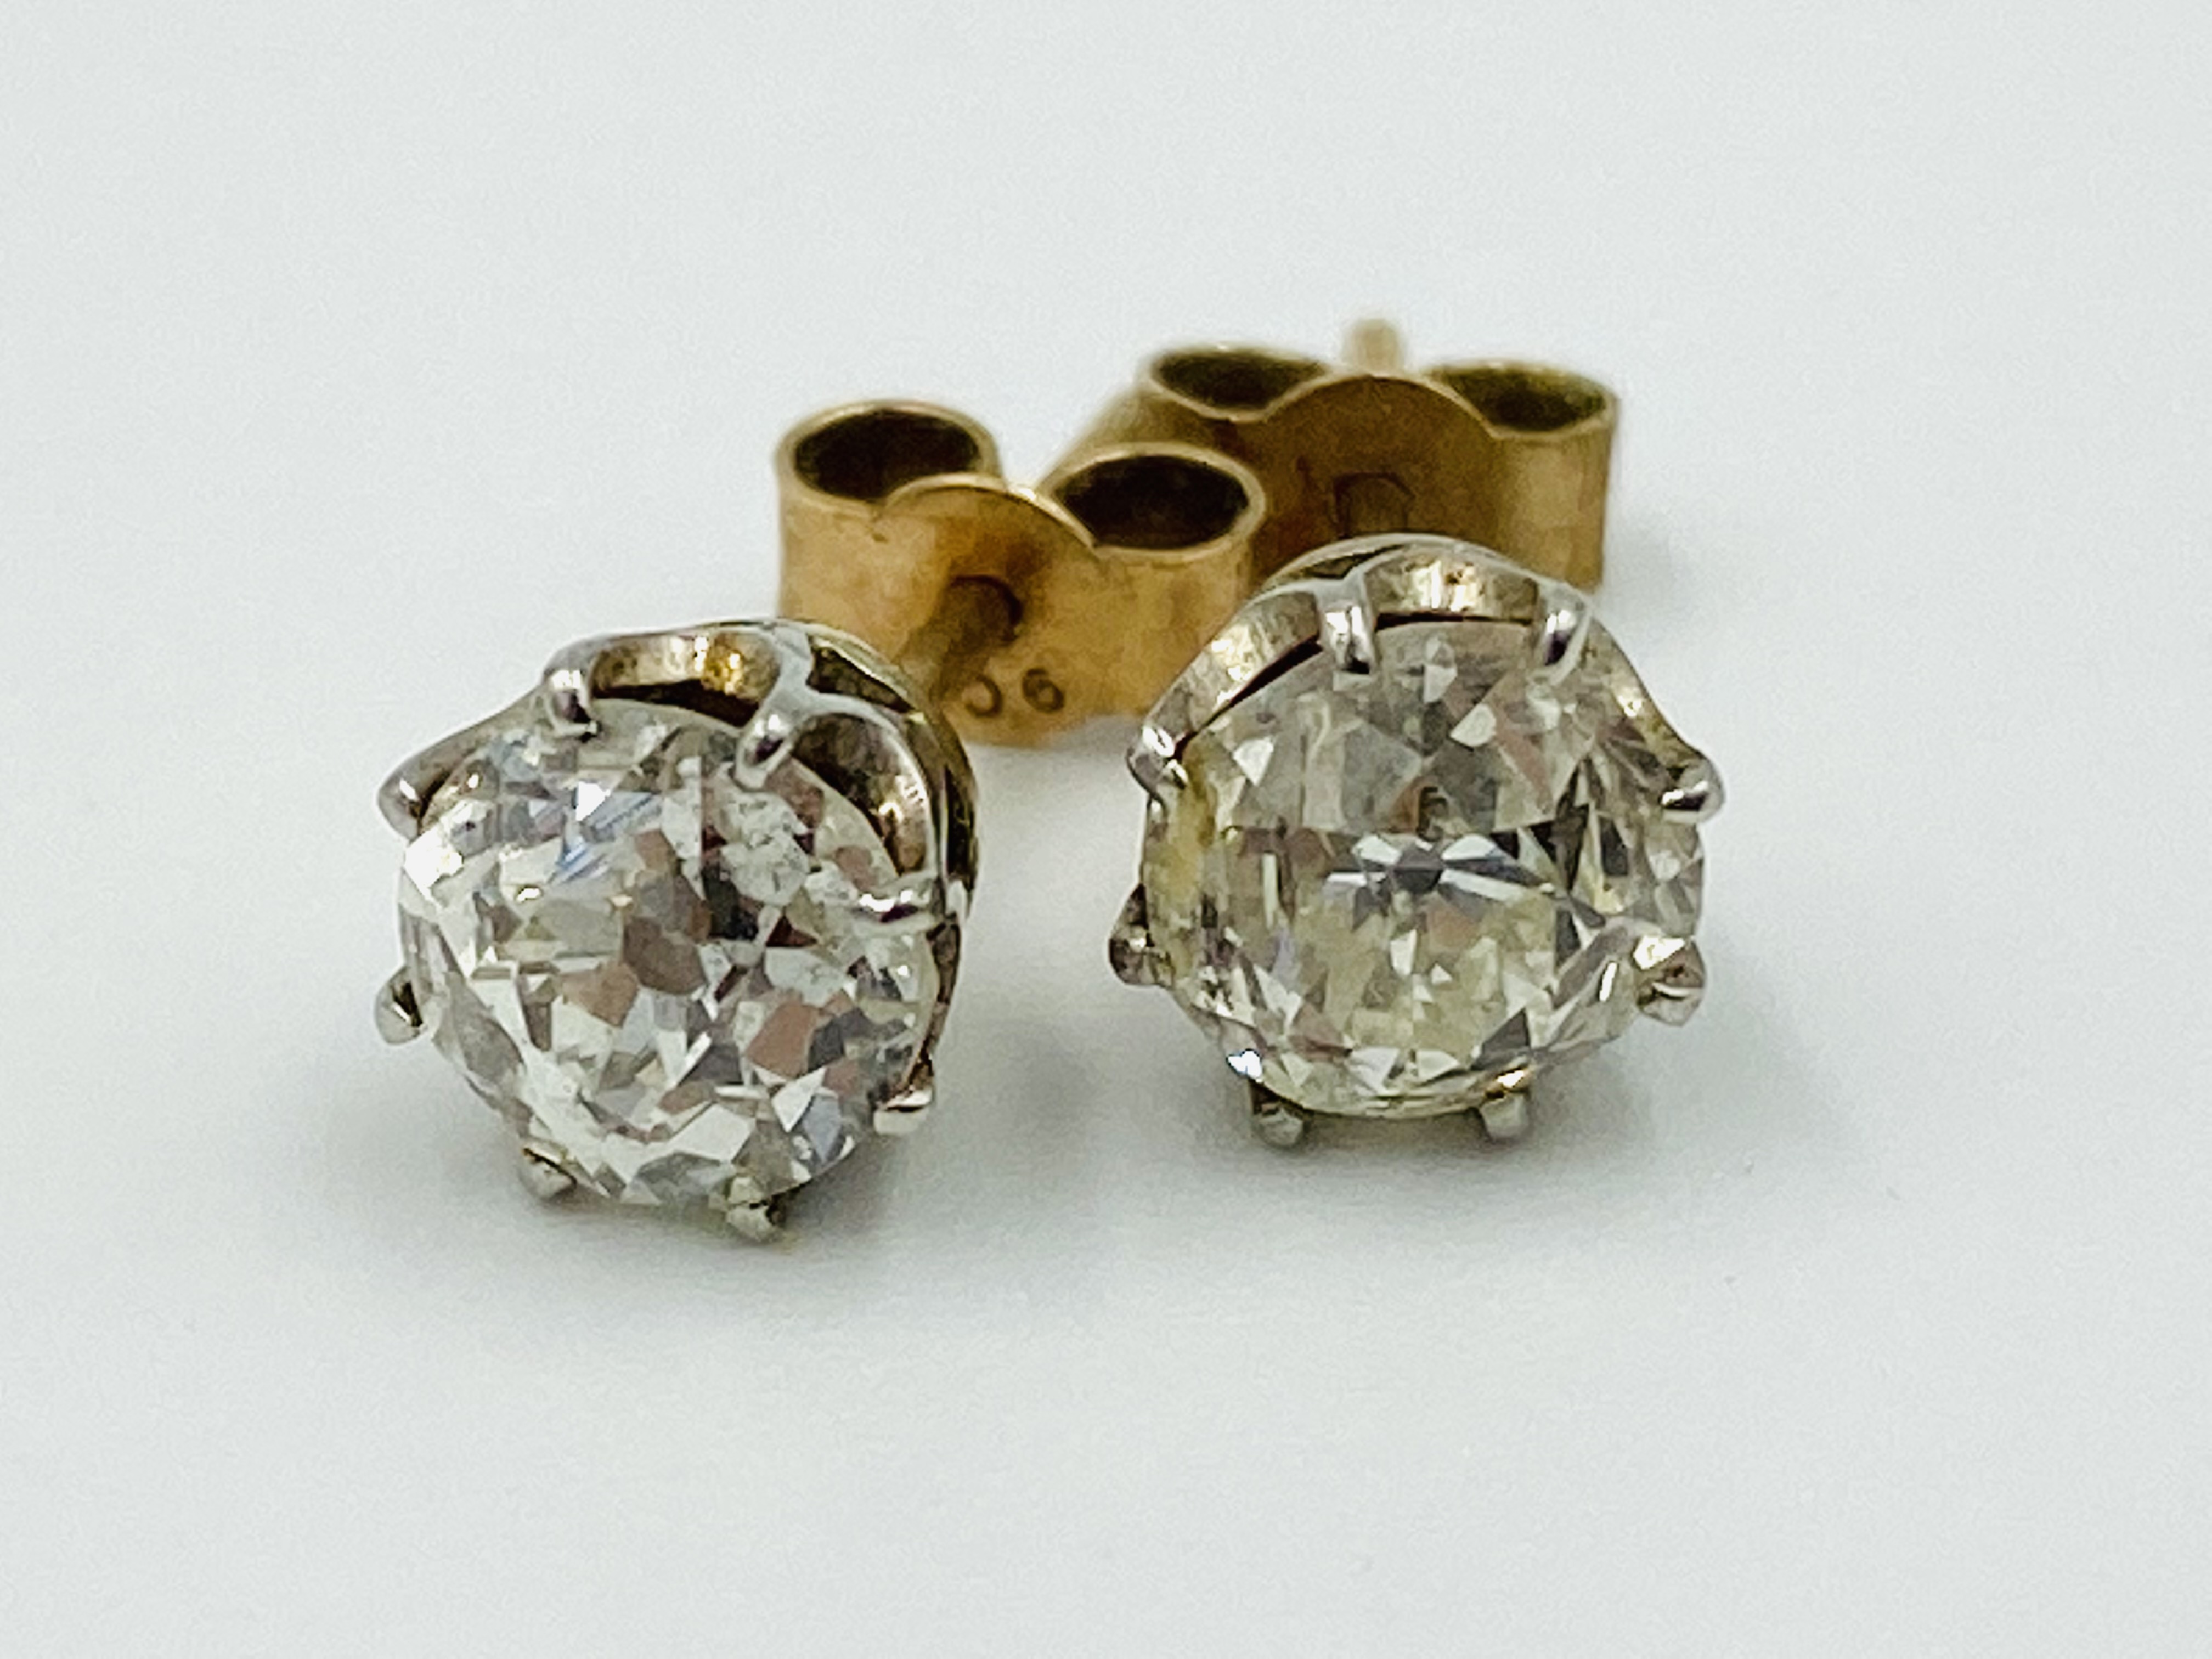 Pair of 9ct gold and diamond earrings - Image 4 of 4